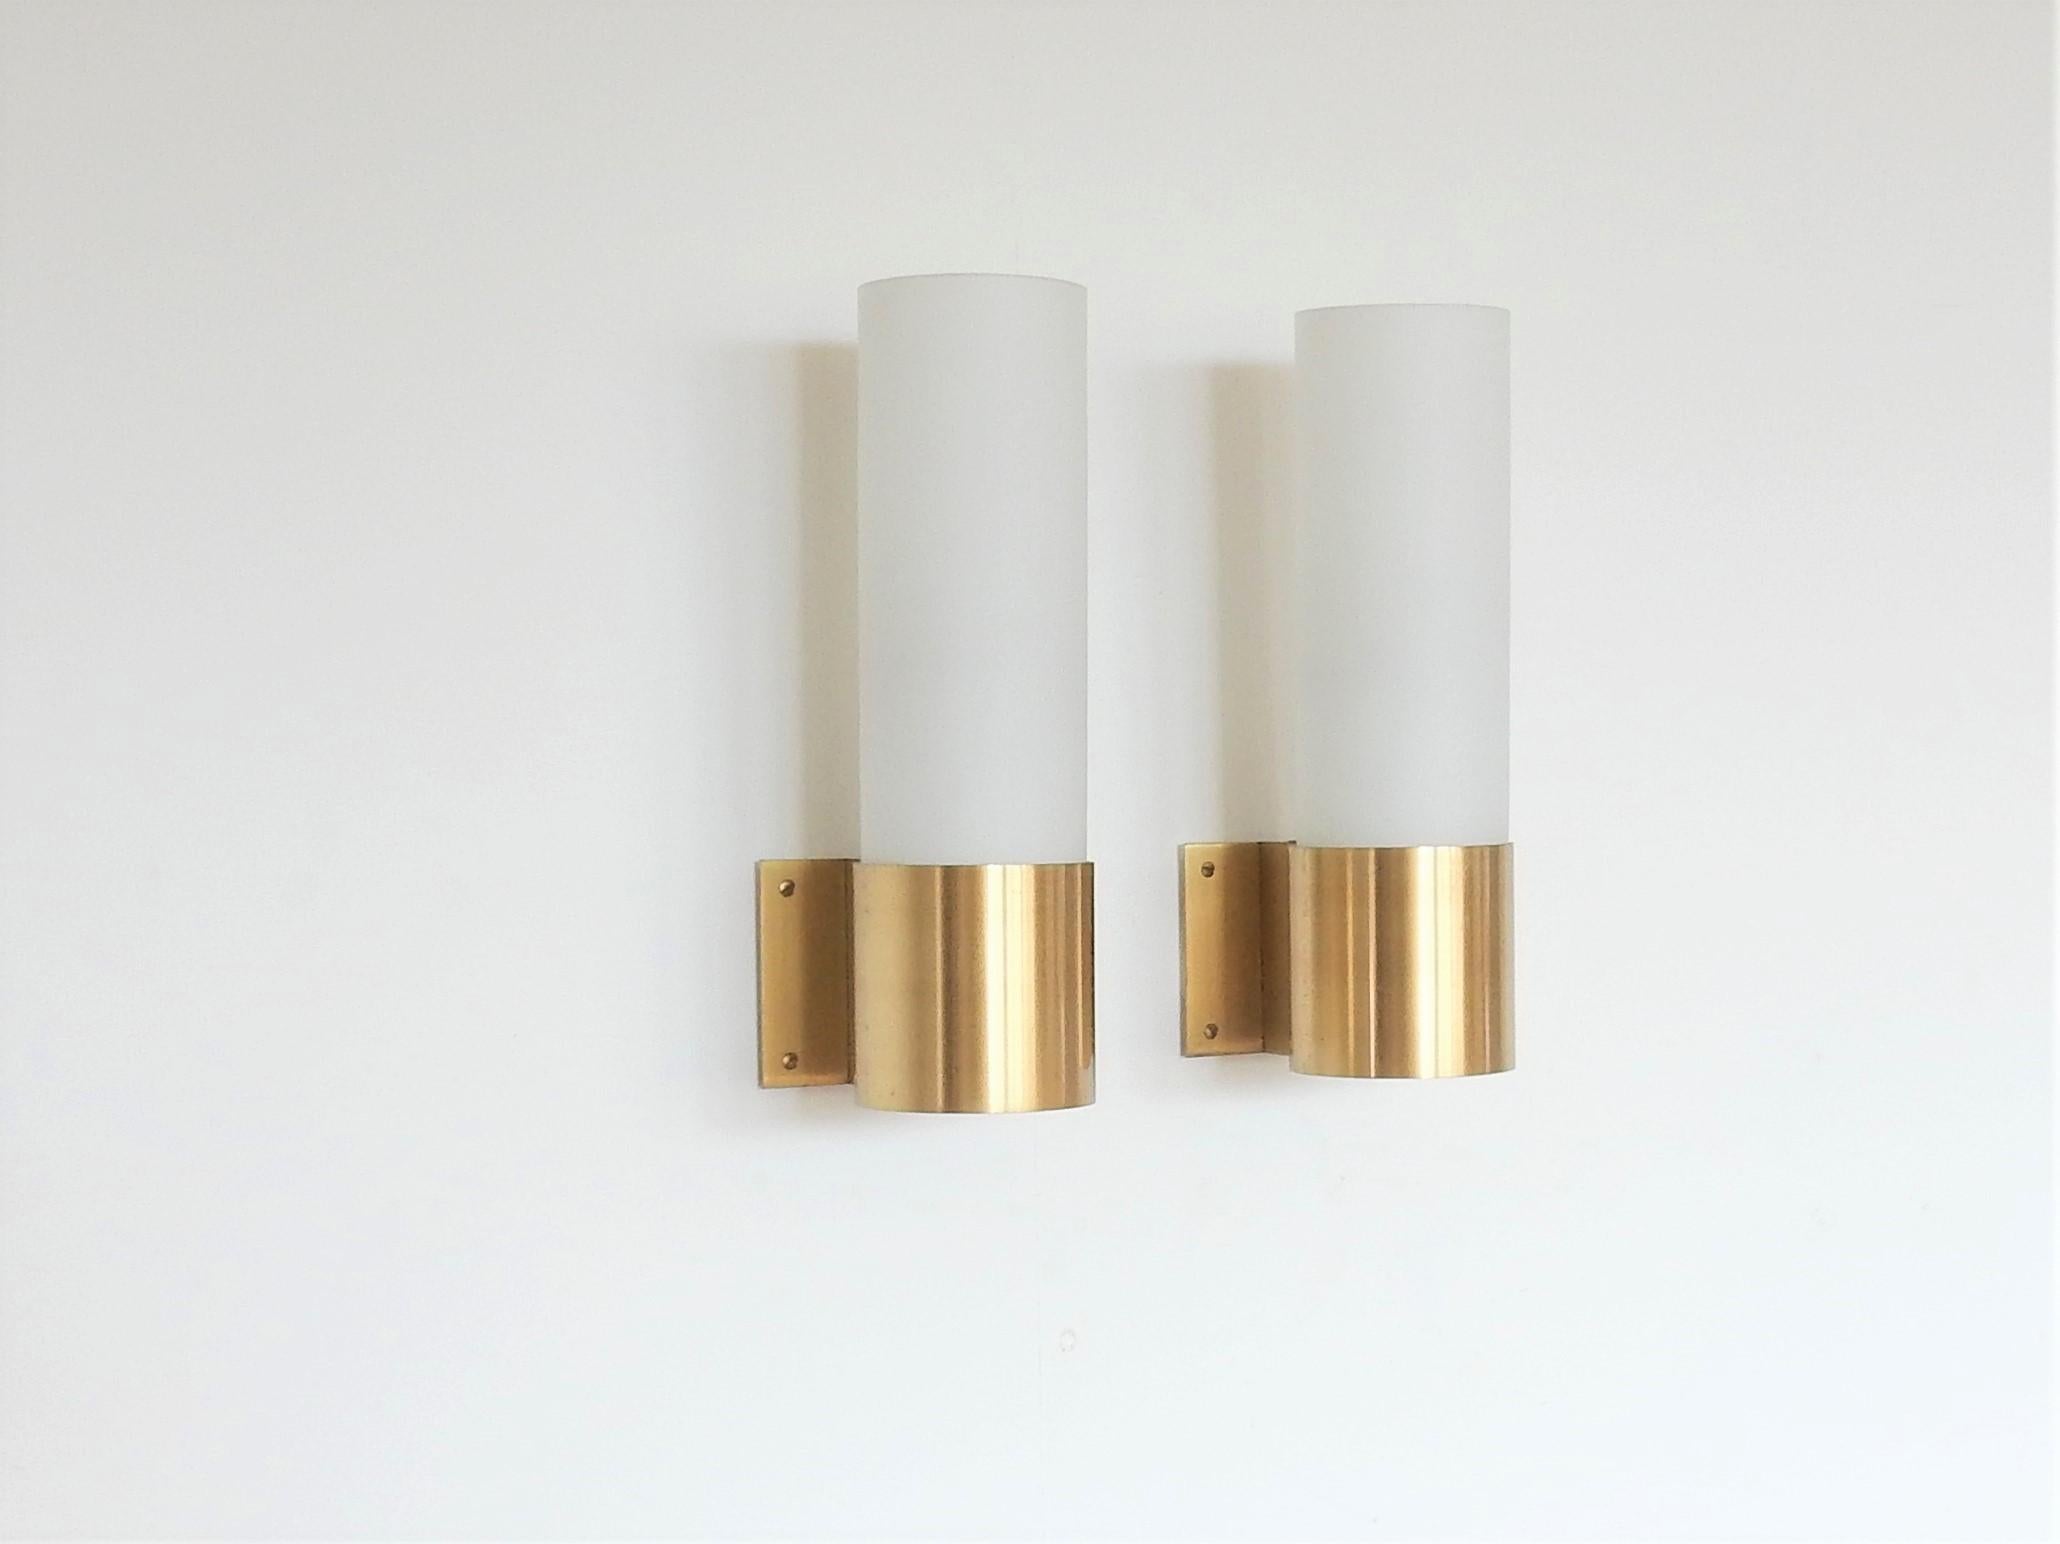 This beautiful and timeless wall lamp was designed by Professor Jørgen Bo for Fog & Mørup in Denmark in the late 1960s. It has a matte copper base with an opaline glass shade that gives a pleasant warm lightning. We have 3 of these lamps available